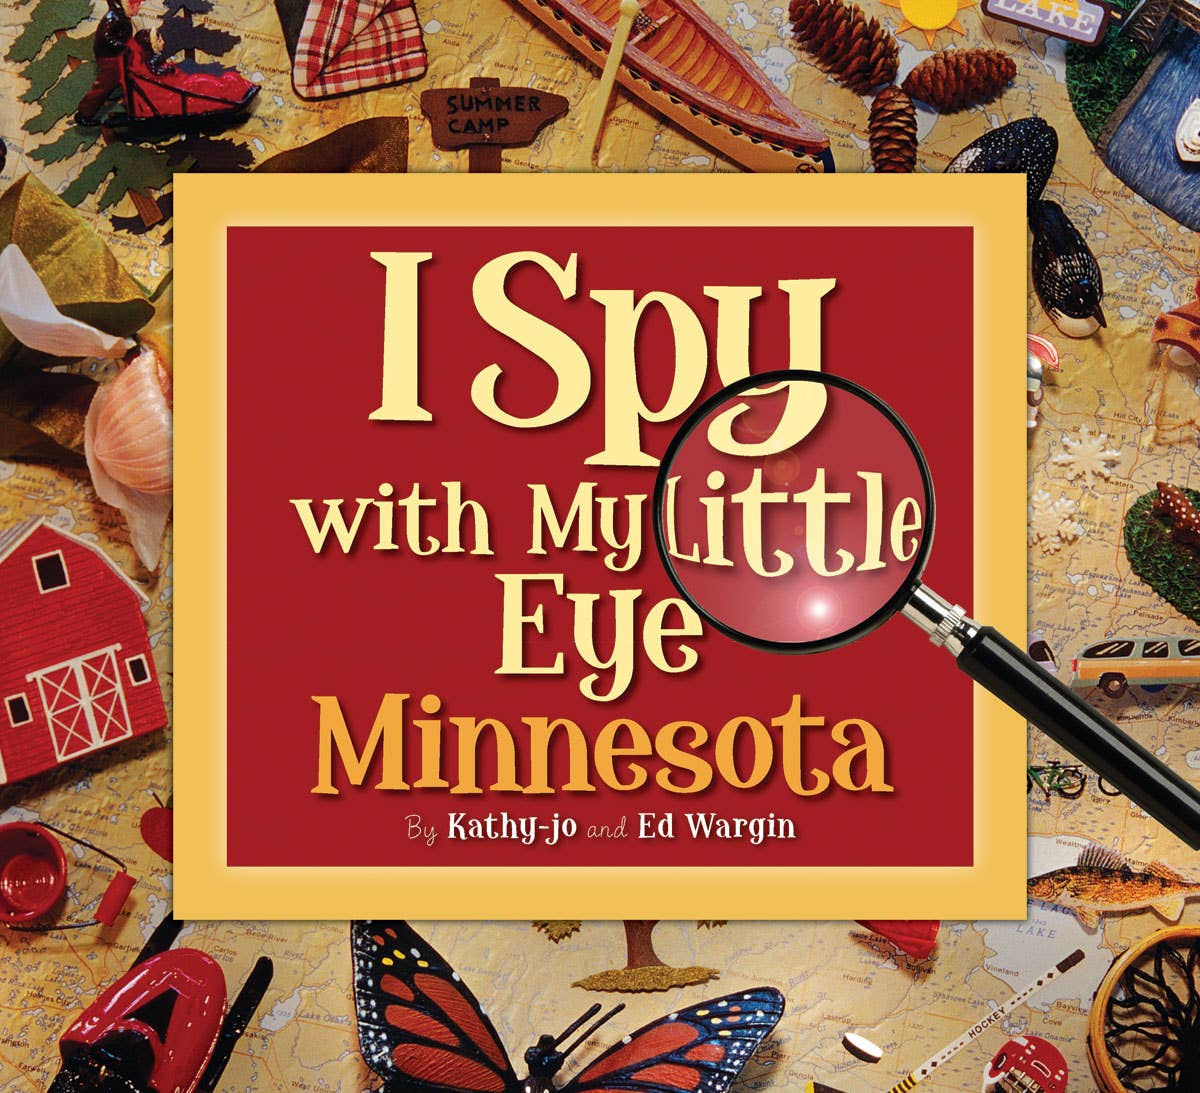 Books: I Spy with My Little Eye: Minnesota picture book